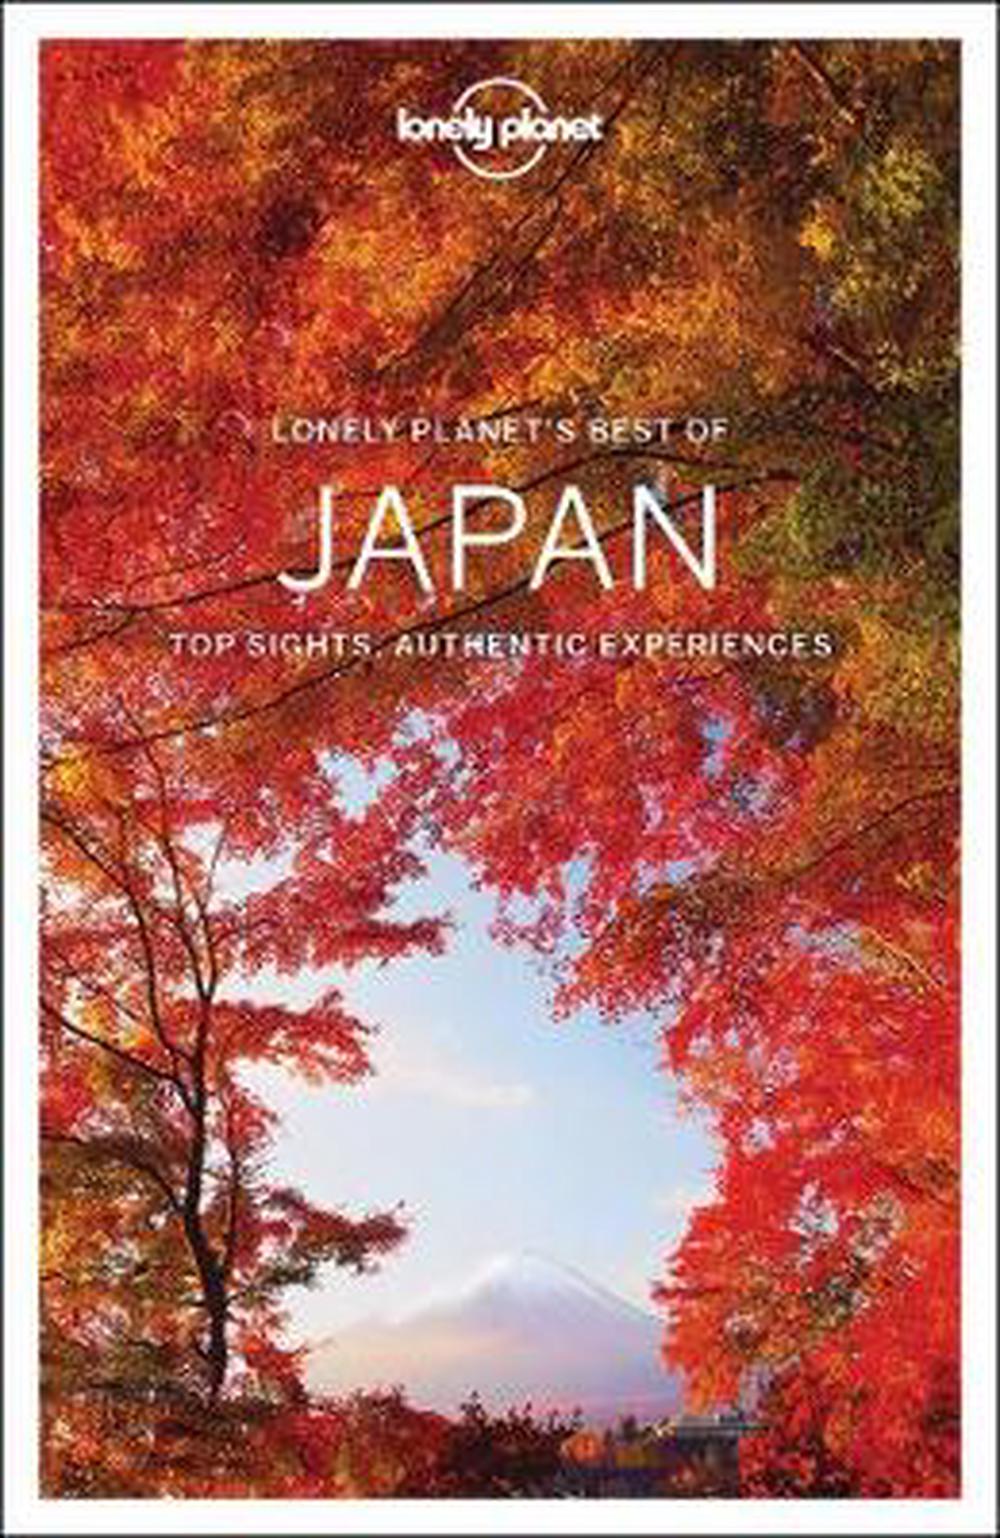 lonely planet japan travel guide